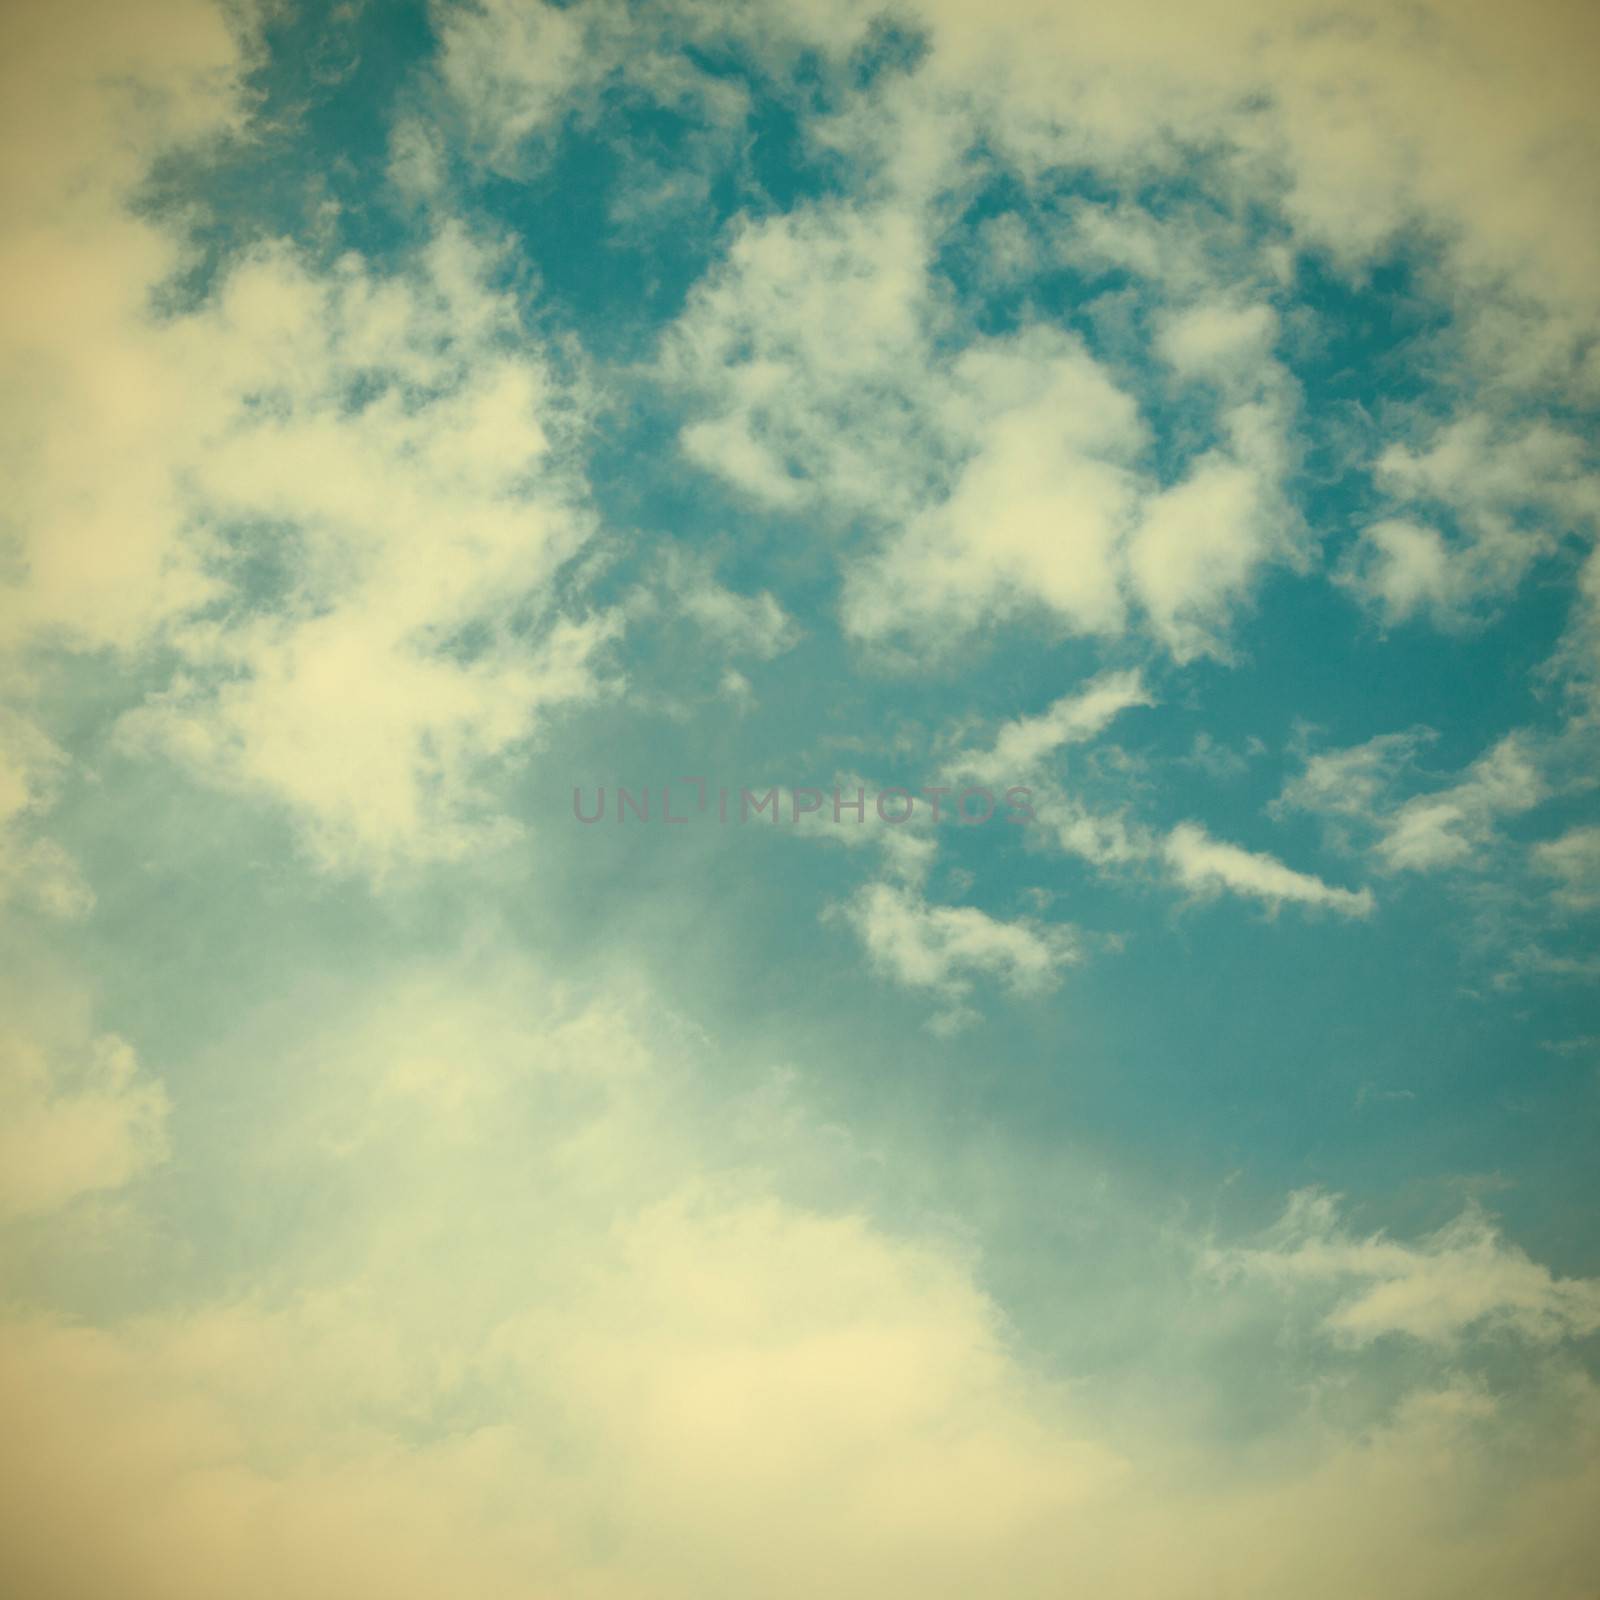 Sky and Clouds by anelina